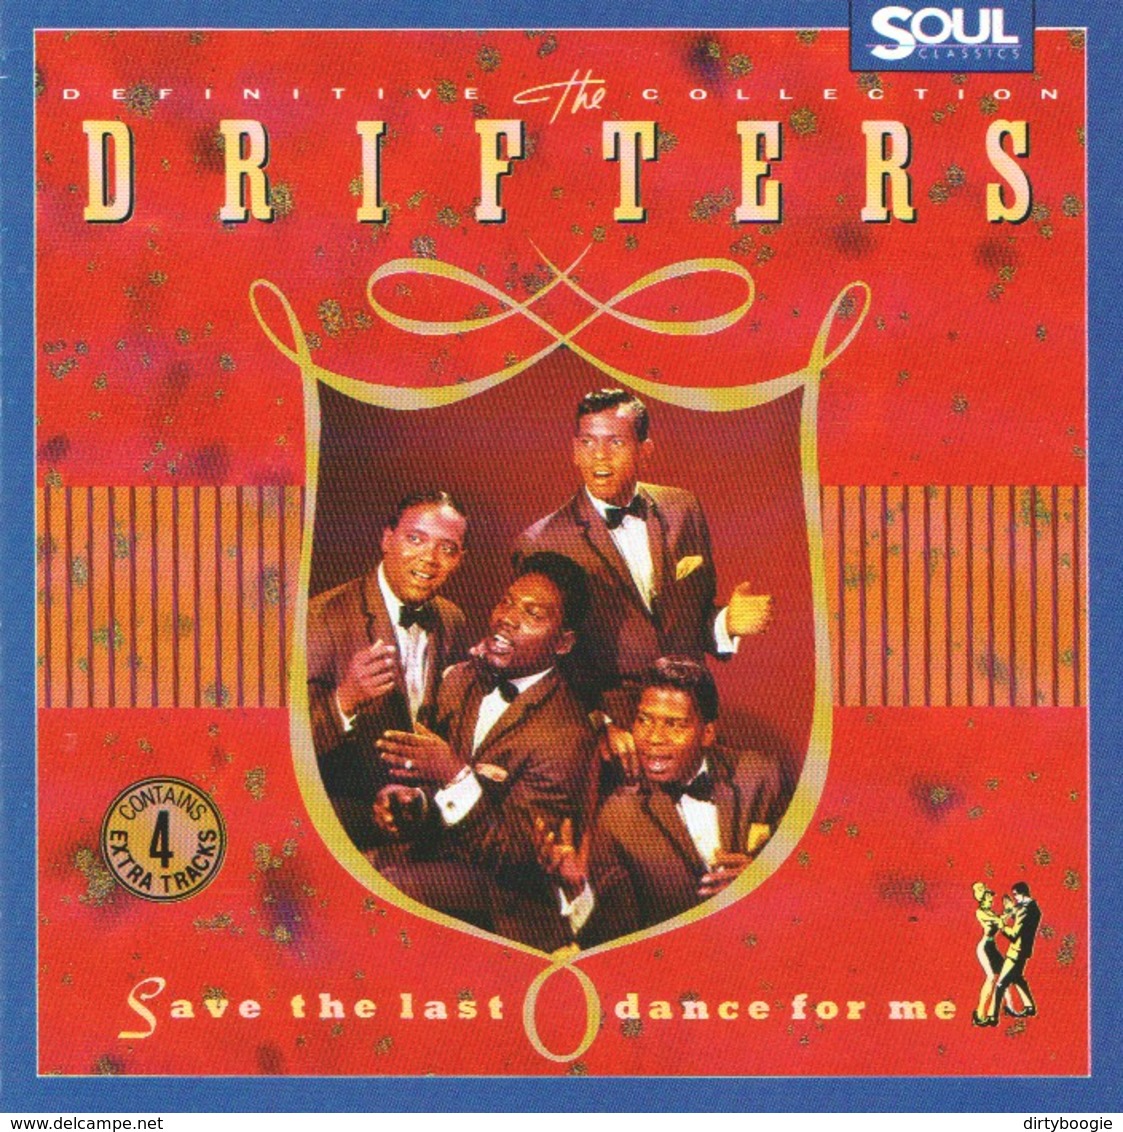 The DRIFTERS - Save The Last Dance For Me - CD - ATLANTIC - Soul - R&B